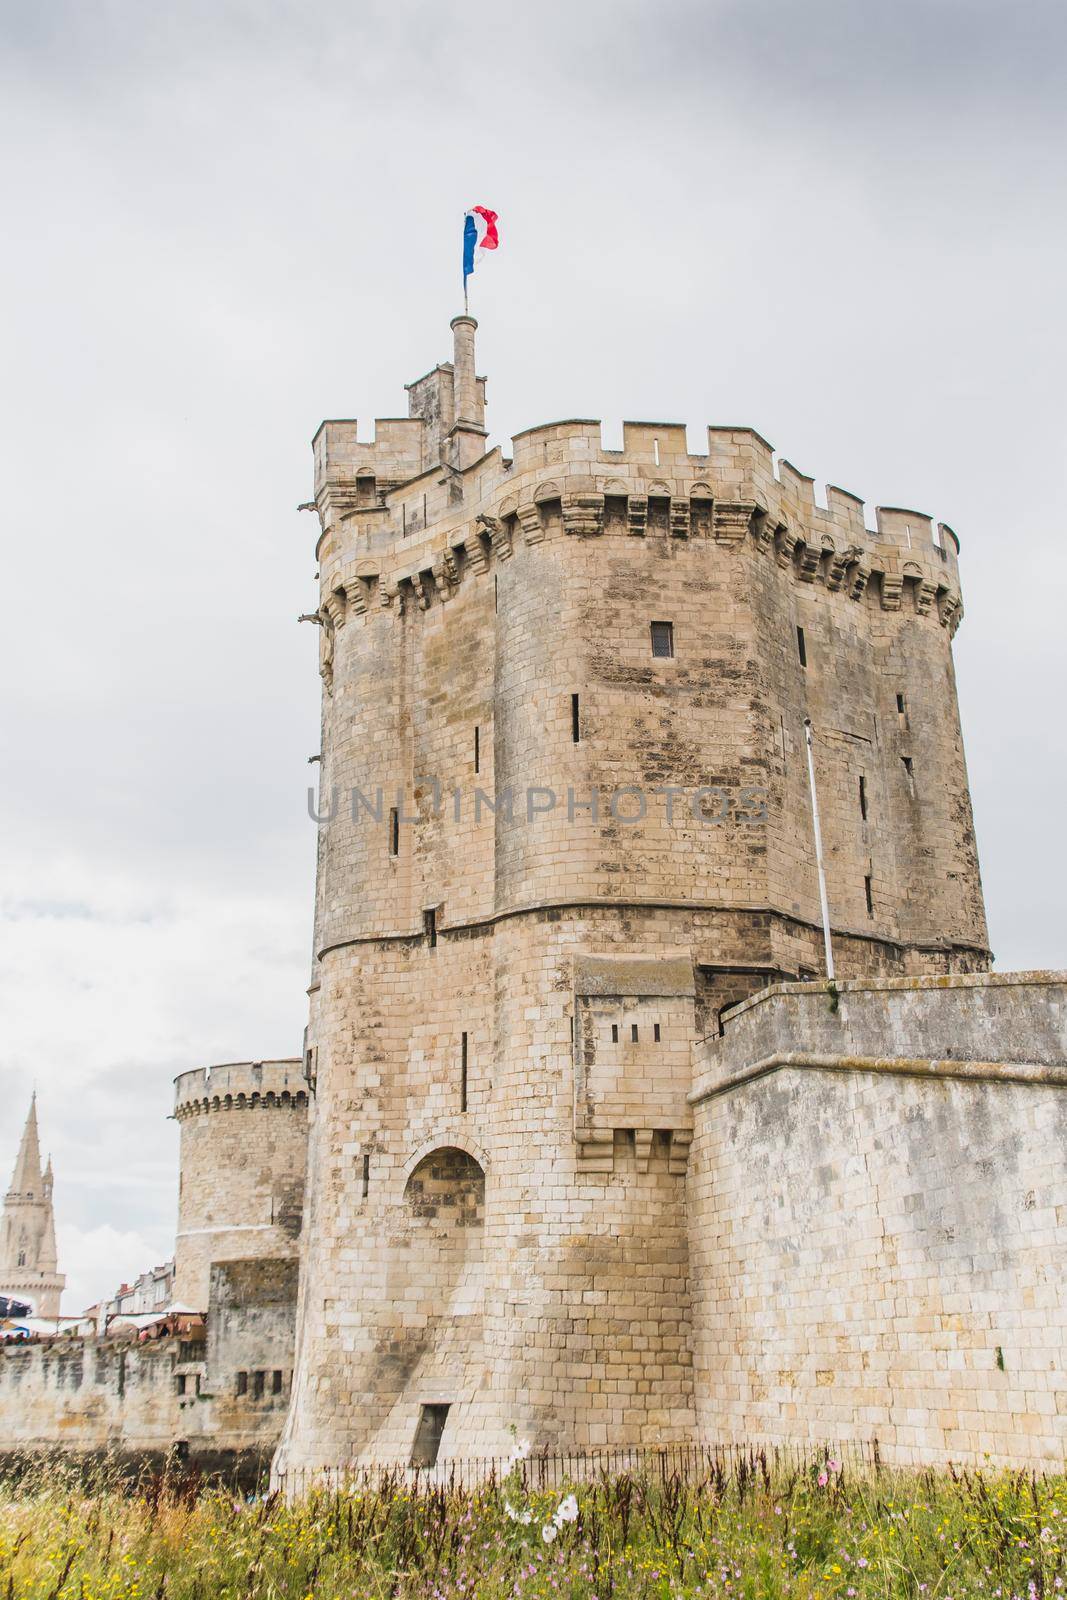 The Saint-Nicolas tower in La Rochelle in the Charente maritime region of France